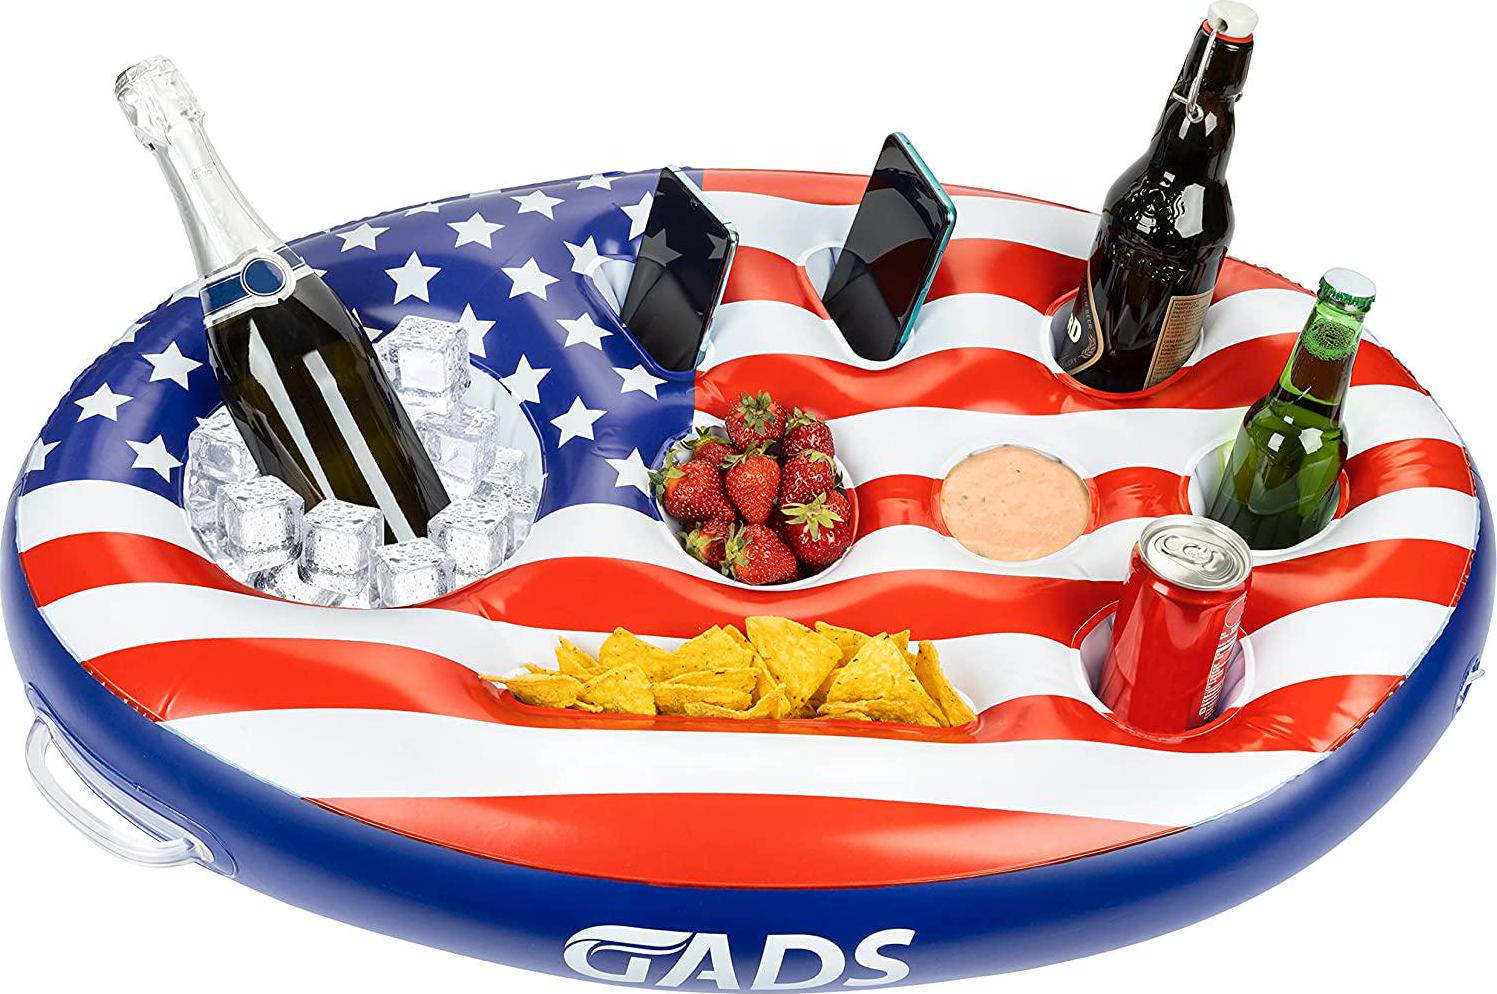 Gads, GADS Patriotic Floating Drink Holder - Fun Inflatable Pool Bar Drink Floats w/ Cup Holder and Tray, Great for Pools, Hot Tubs, Jacuzzi, Beach Party Accessories Floaties, American Flag 20x30 Inches